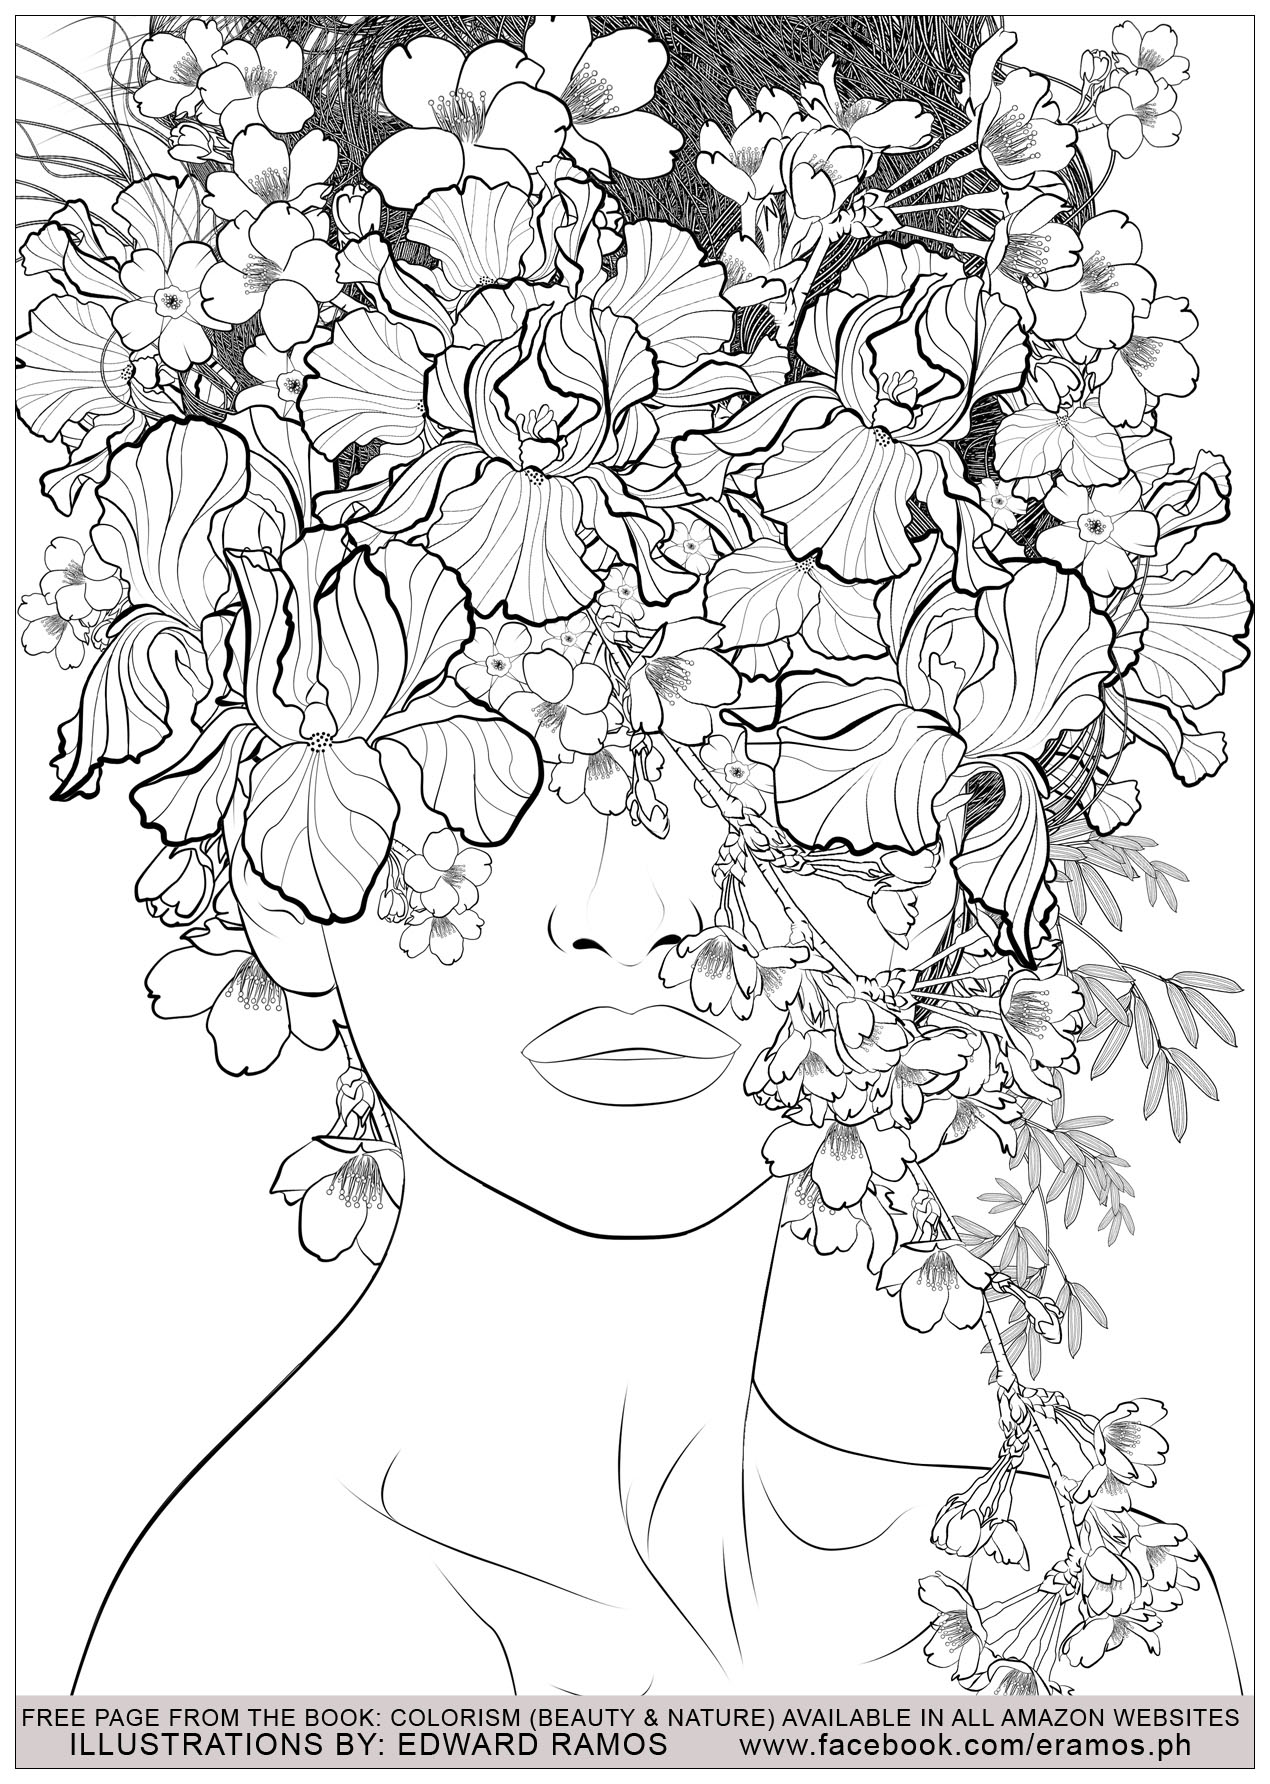 Beauty and nature edward ramos 7 - Anti stress Adult Coloring Pages